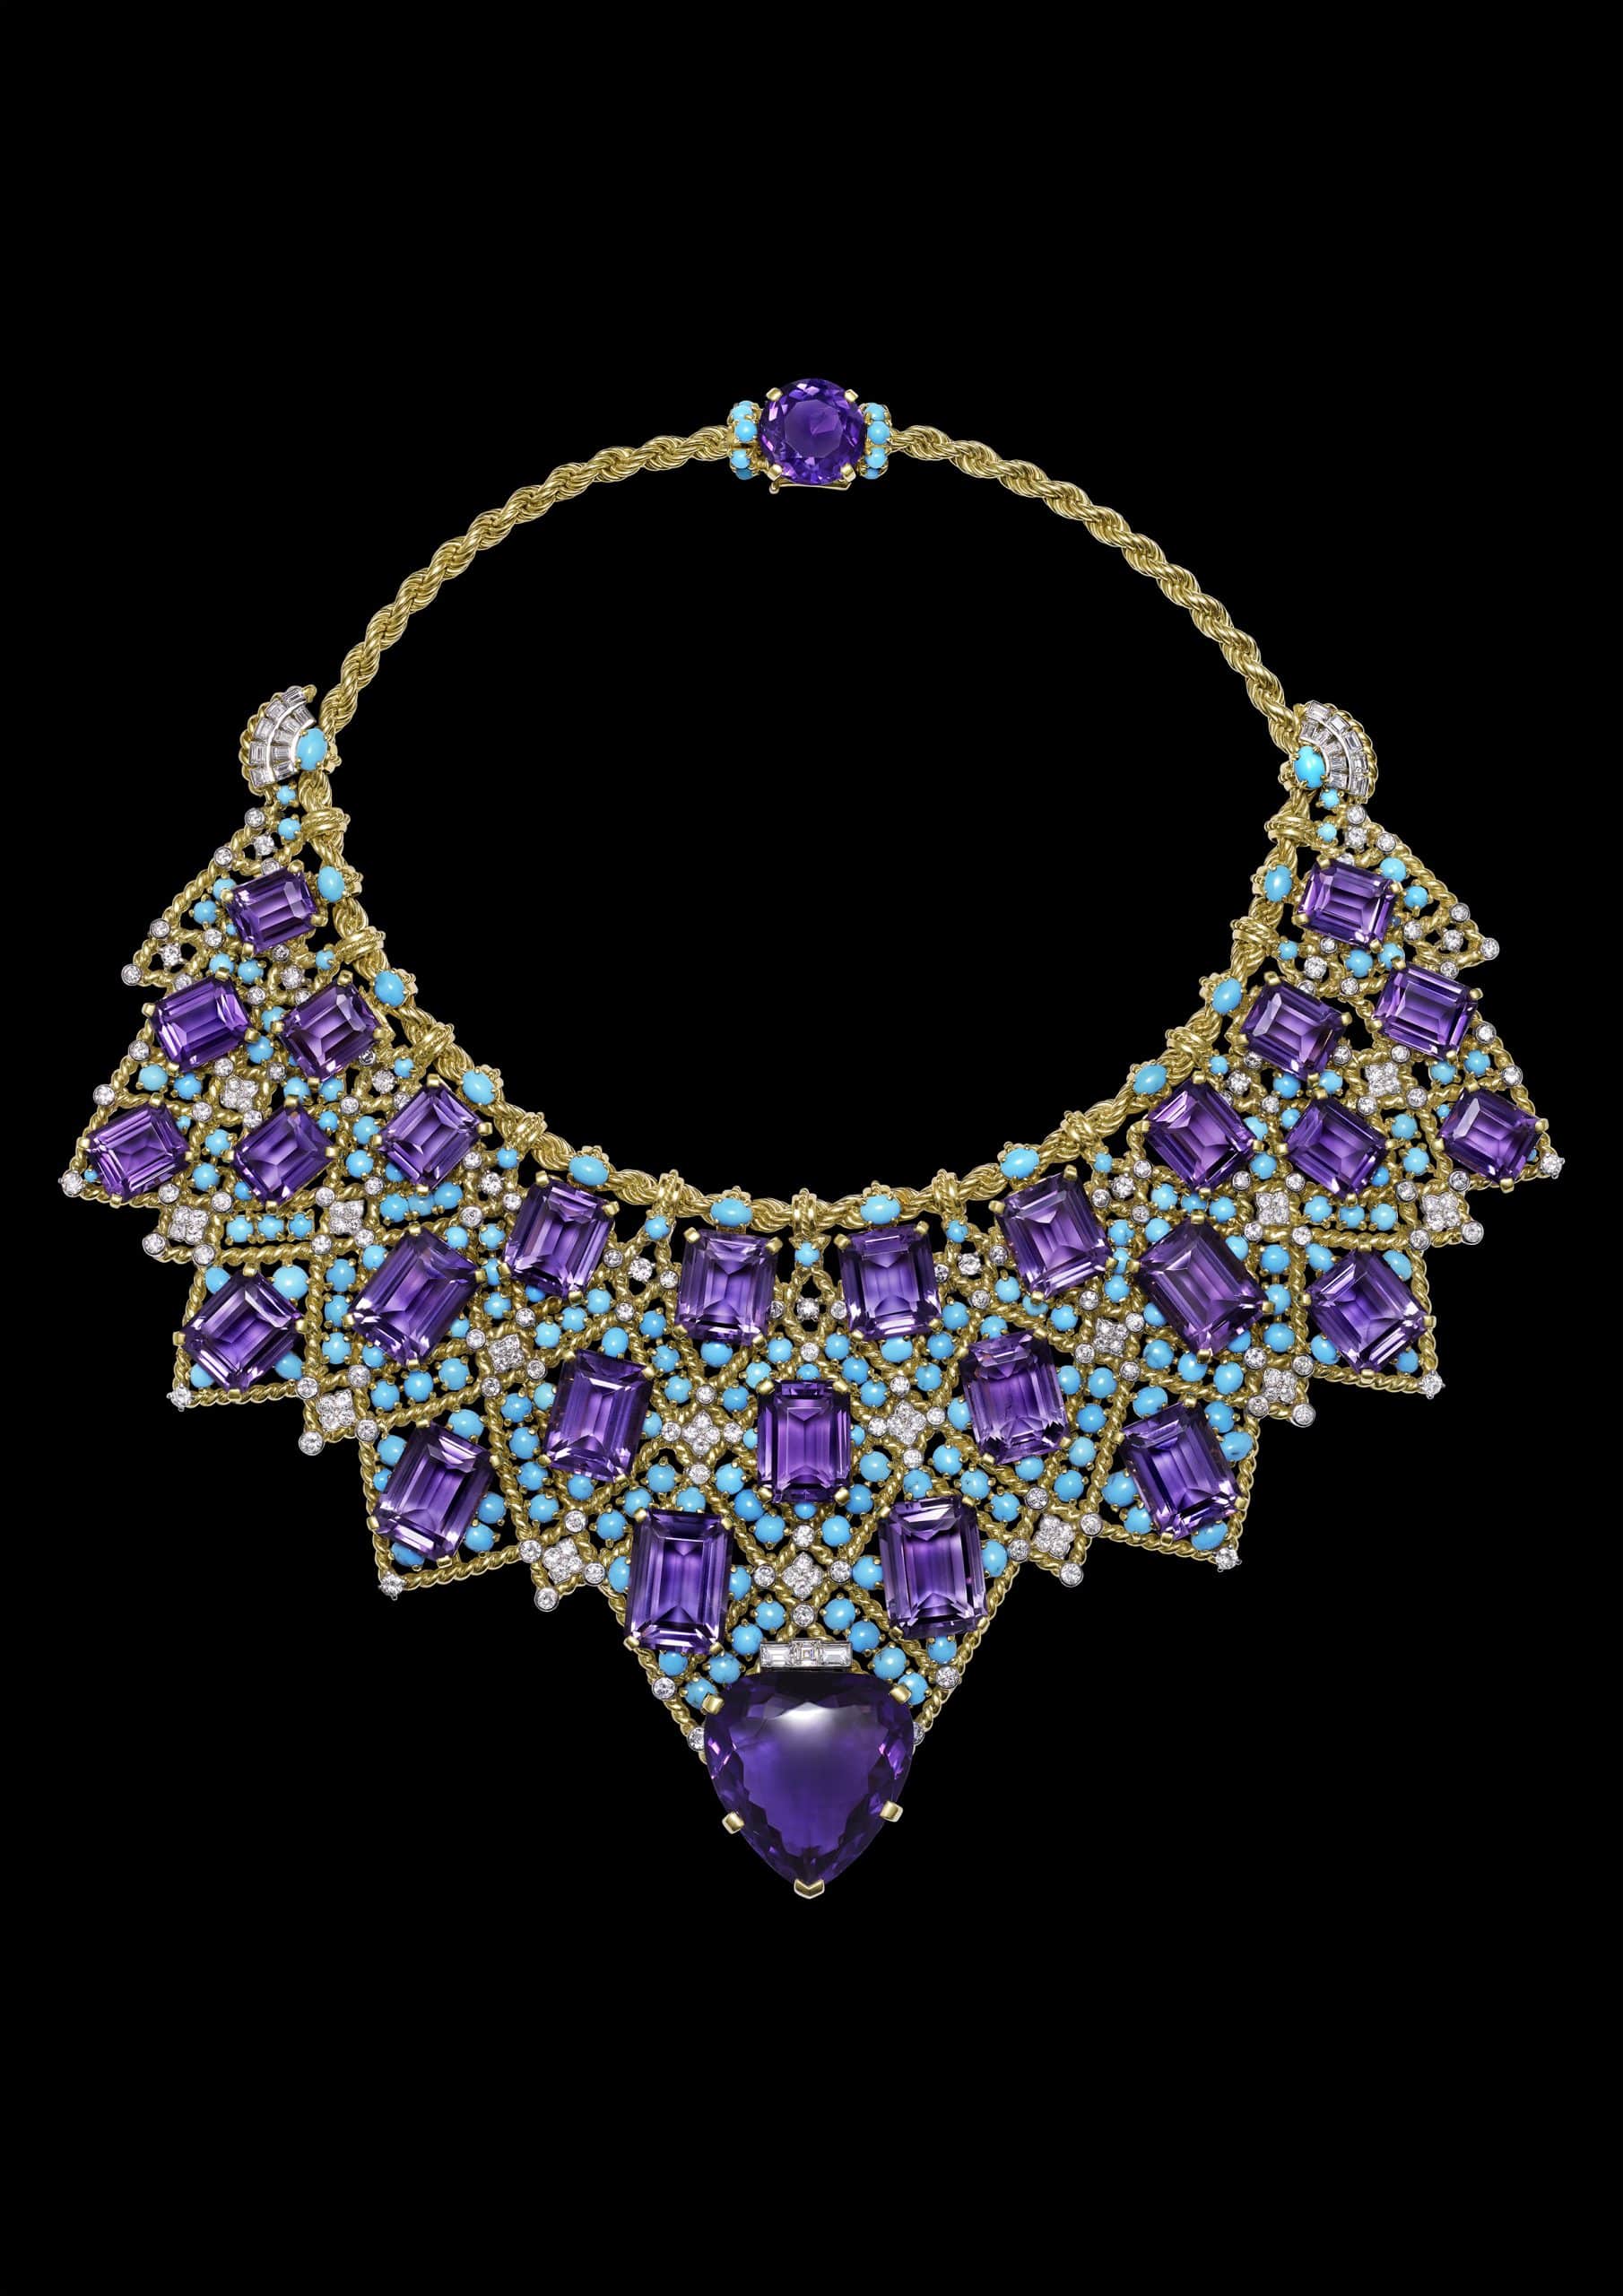 Discover Why Islamic Art Is an Enduring Influence on Cartier Jewelry